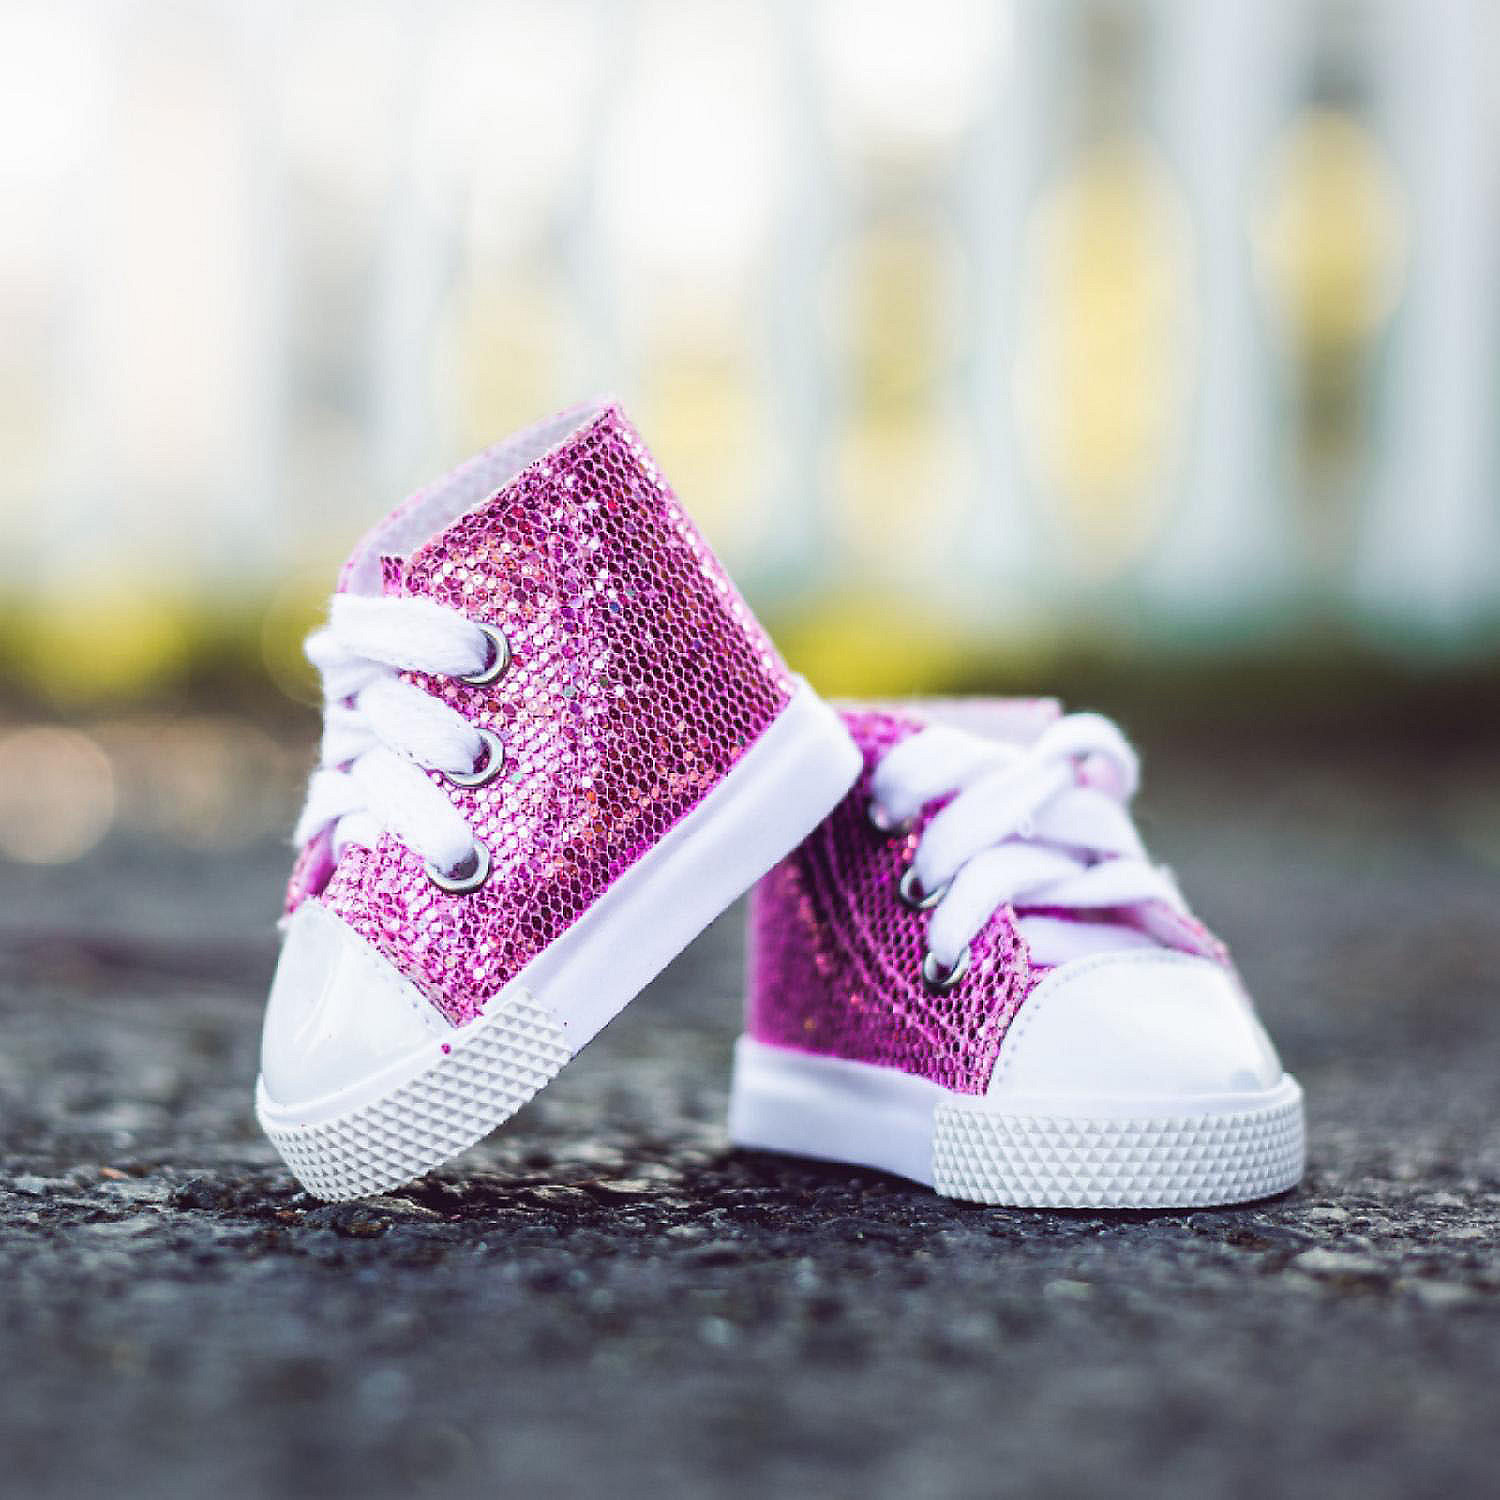 the-queens-treasures-18-inch-girl-doll-clothing-shoes-pink-sparkle-high-cut-american-style-sneakers-complete-with-box_14320251$NOWA$